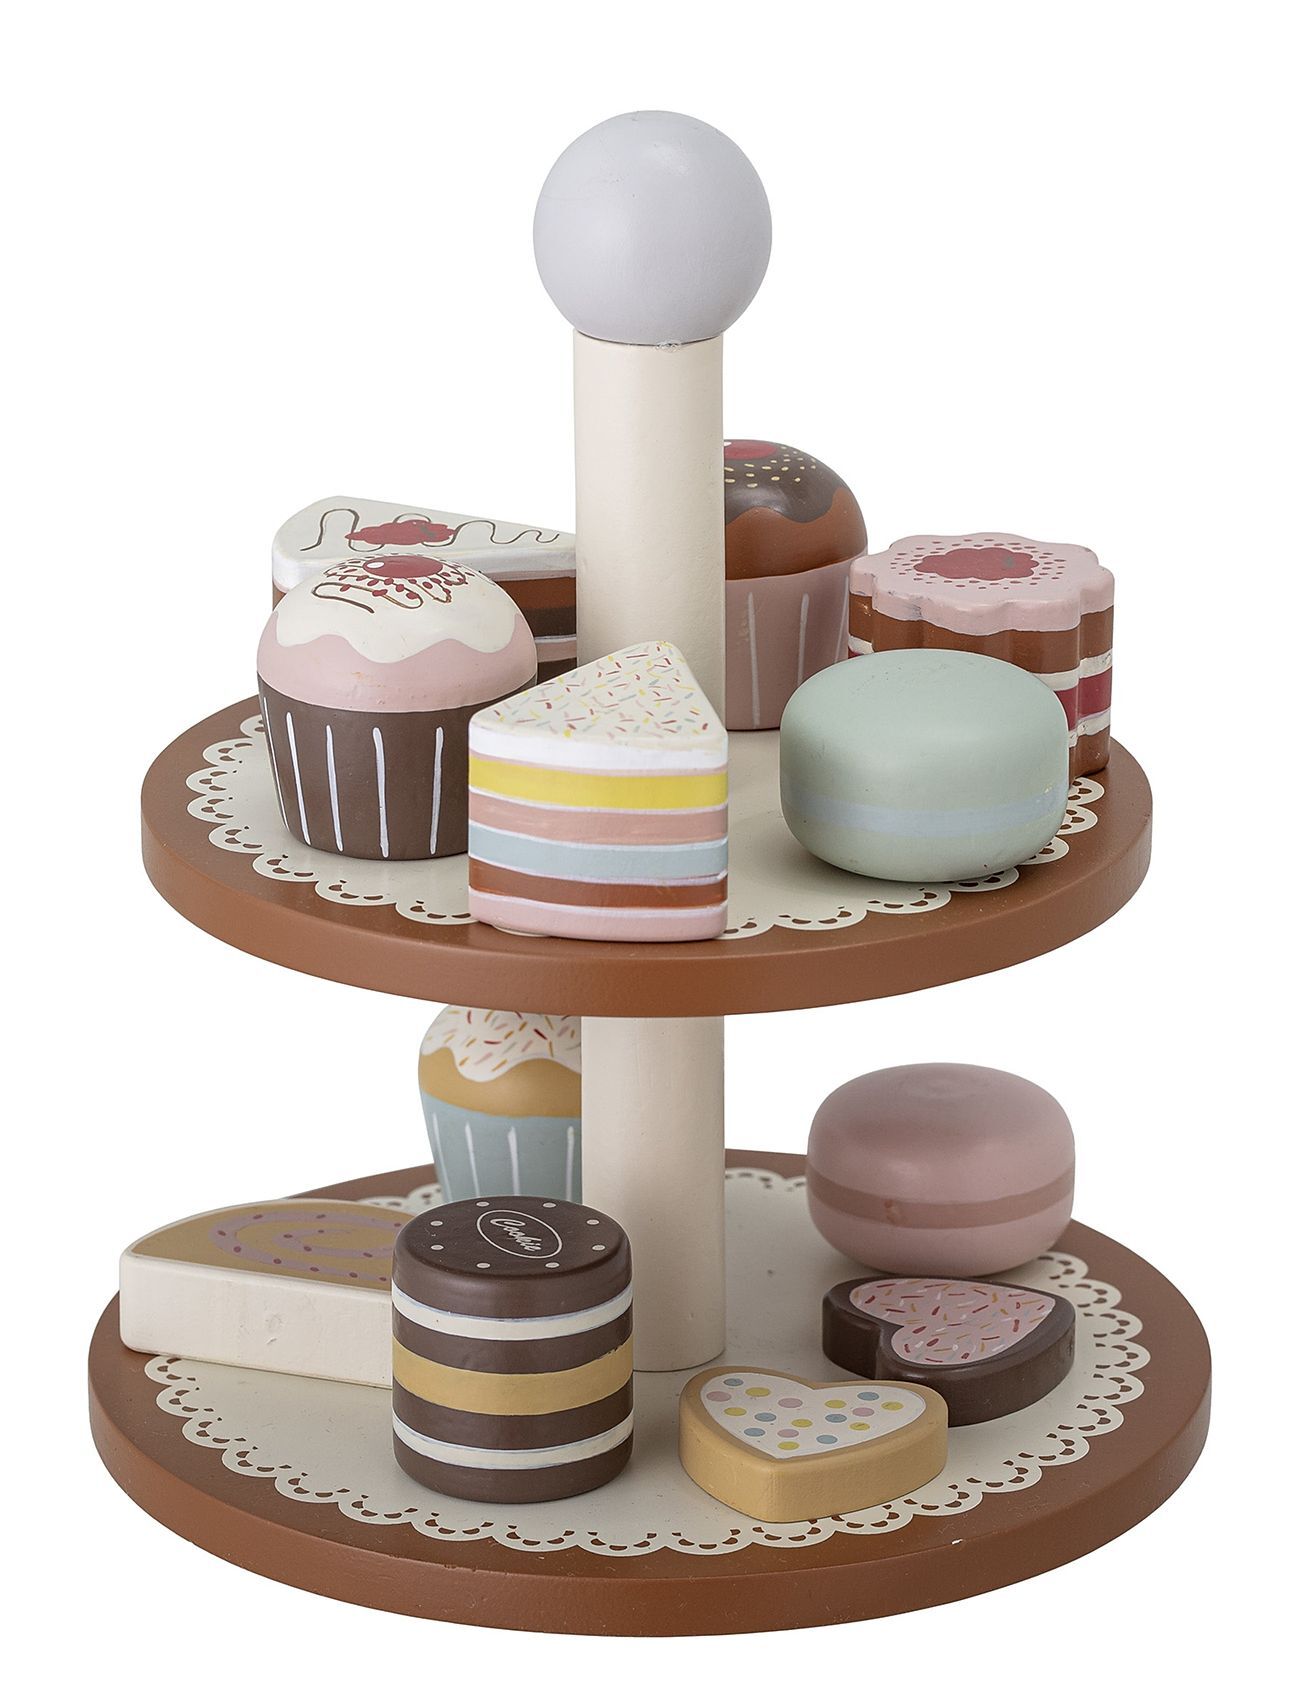 Bloomingville Carlina Toy Food Set Of 13 Toys Toy Kitchen & Accessories Toy Food & Cakes Multi/mønstret Bloomingville